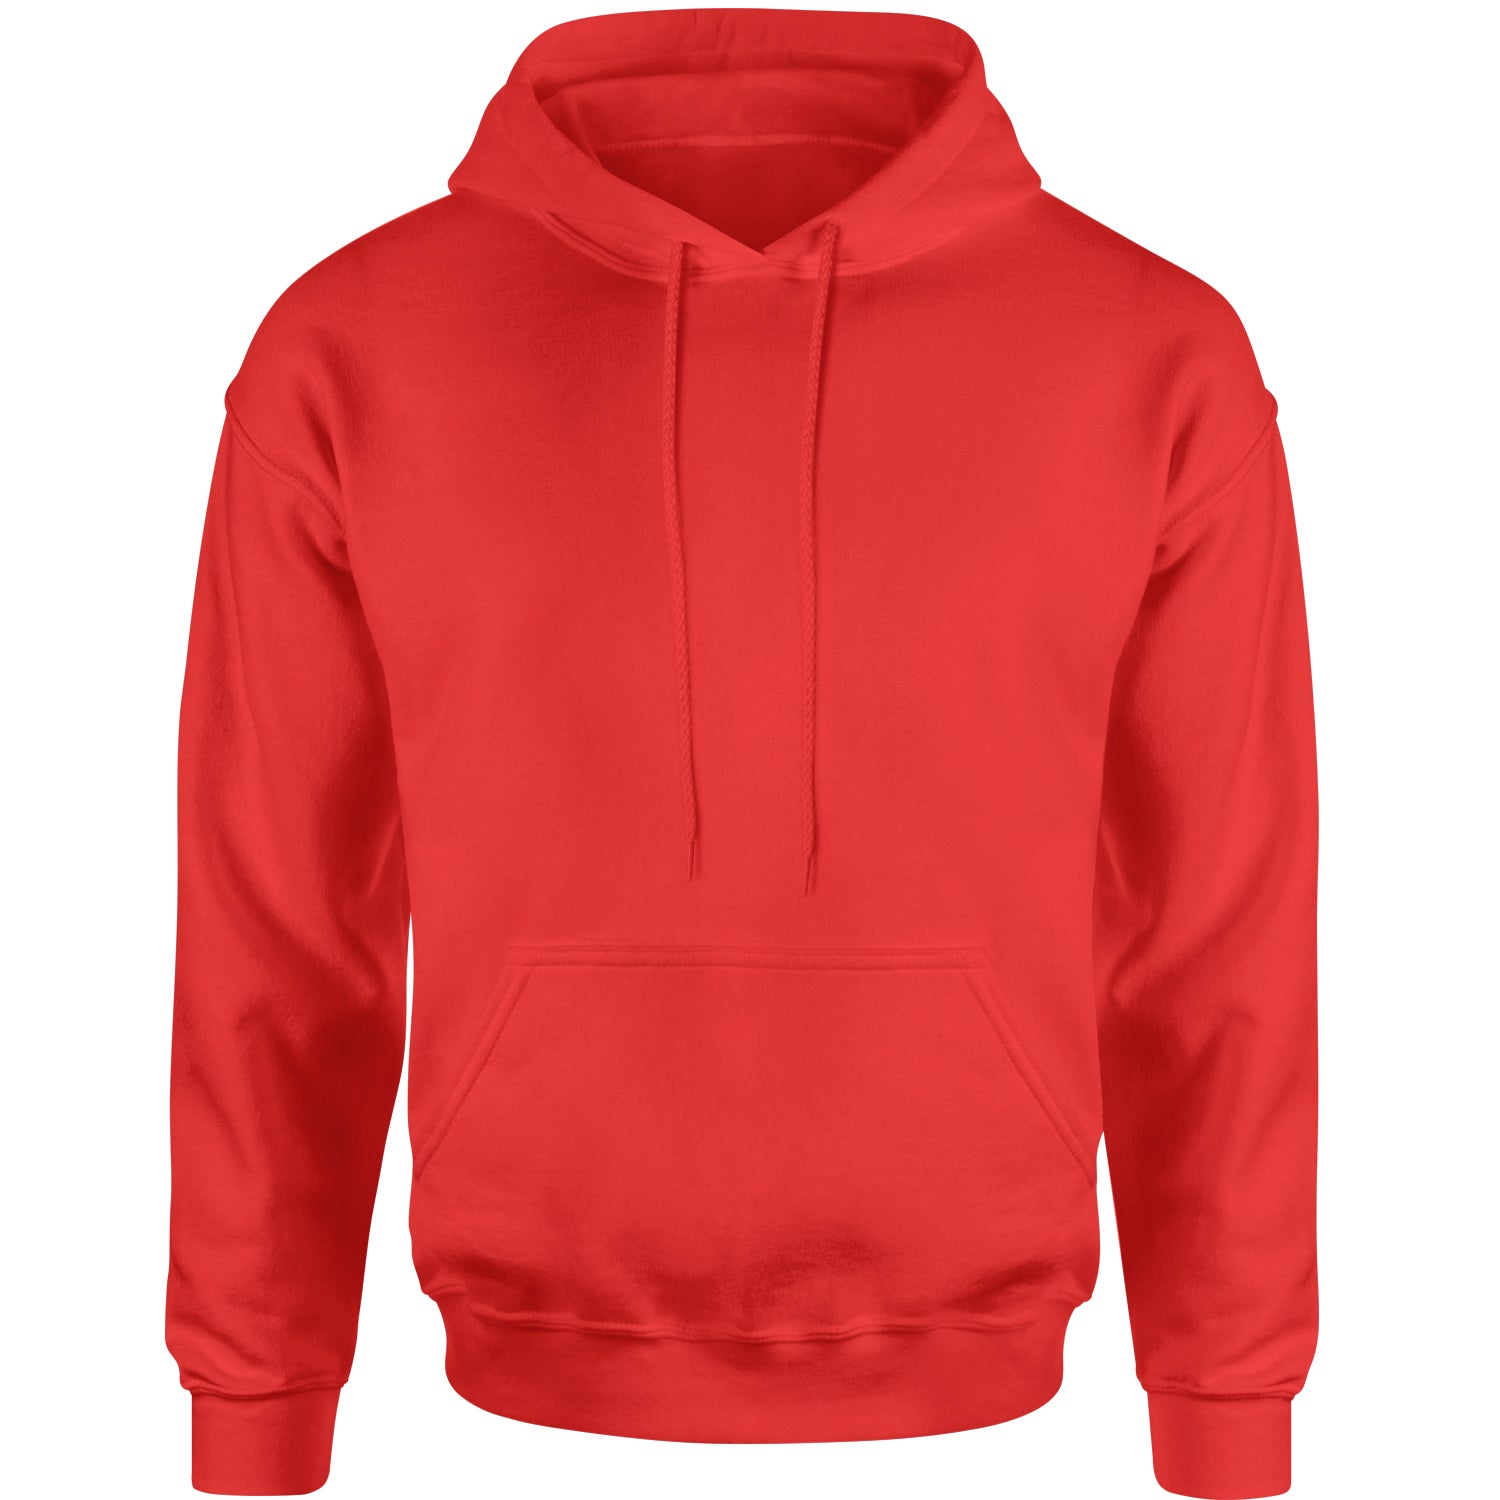 Custom Hoodies Sweatshirts For Adults & Kids create your own, custom, CustomClothing, customized, personalized, youth-sized by Expression Tees